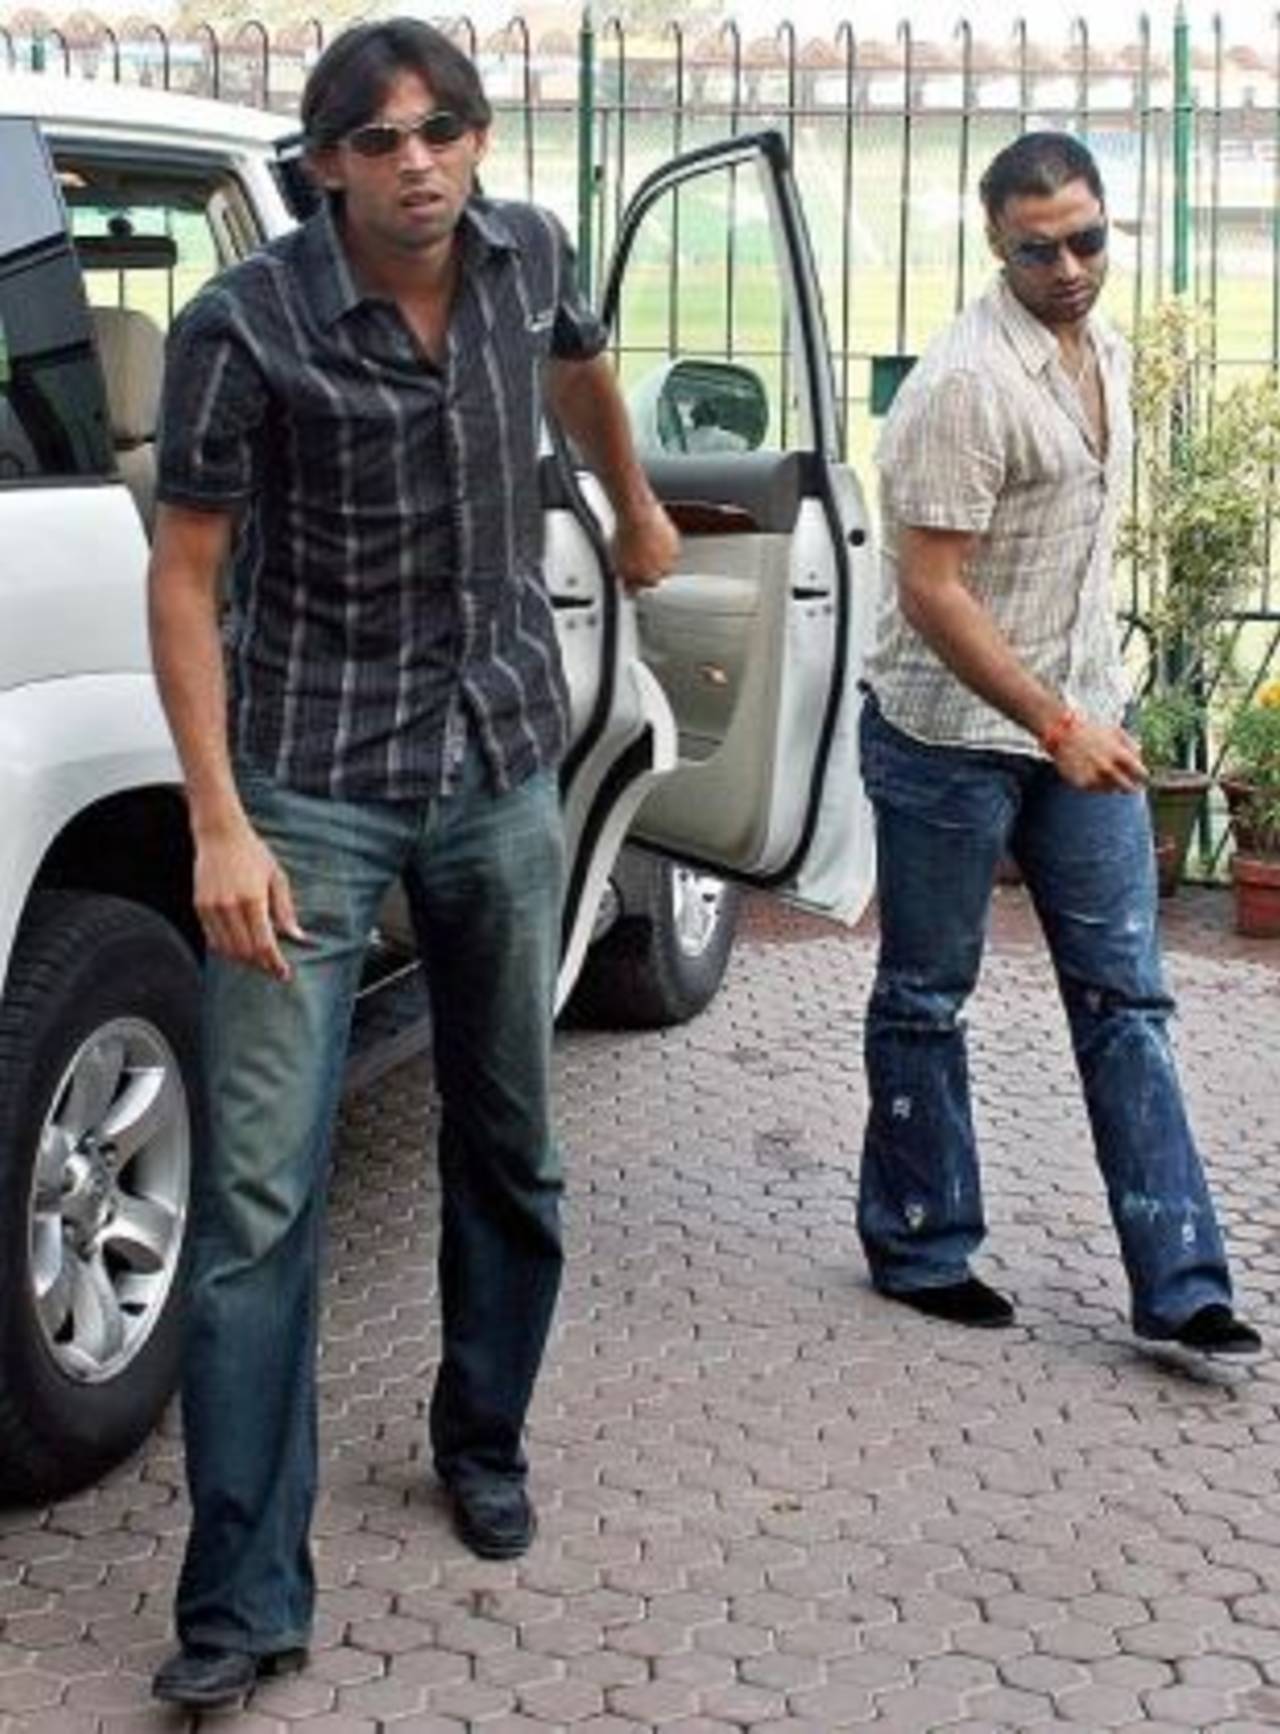 Mohammad Asif and Shoaib Akhtar arrive at the Gaddafi Stadium for a hearing on doping charges, Lahore, October 28, 2006